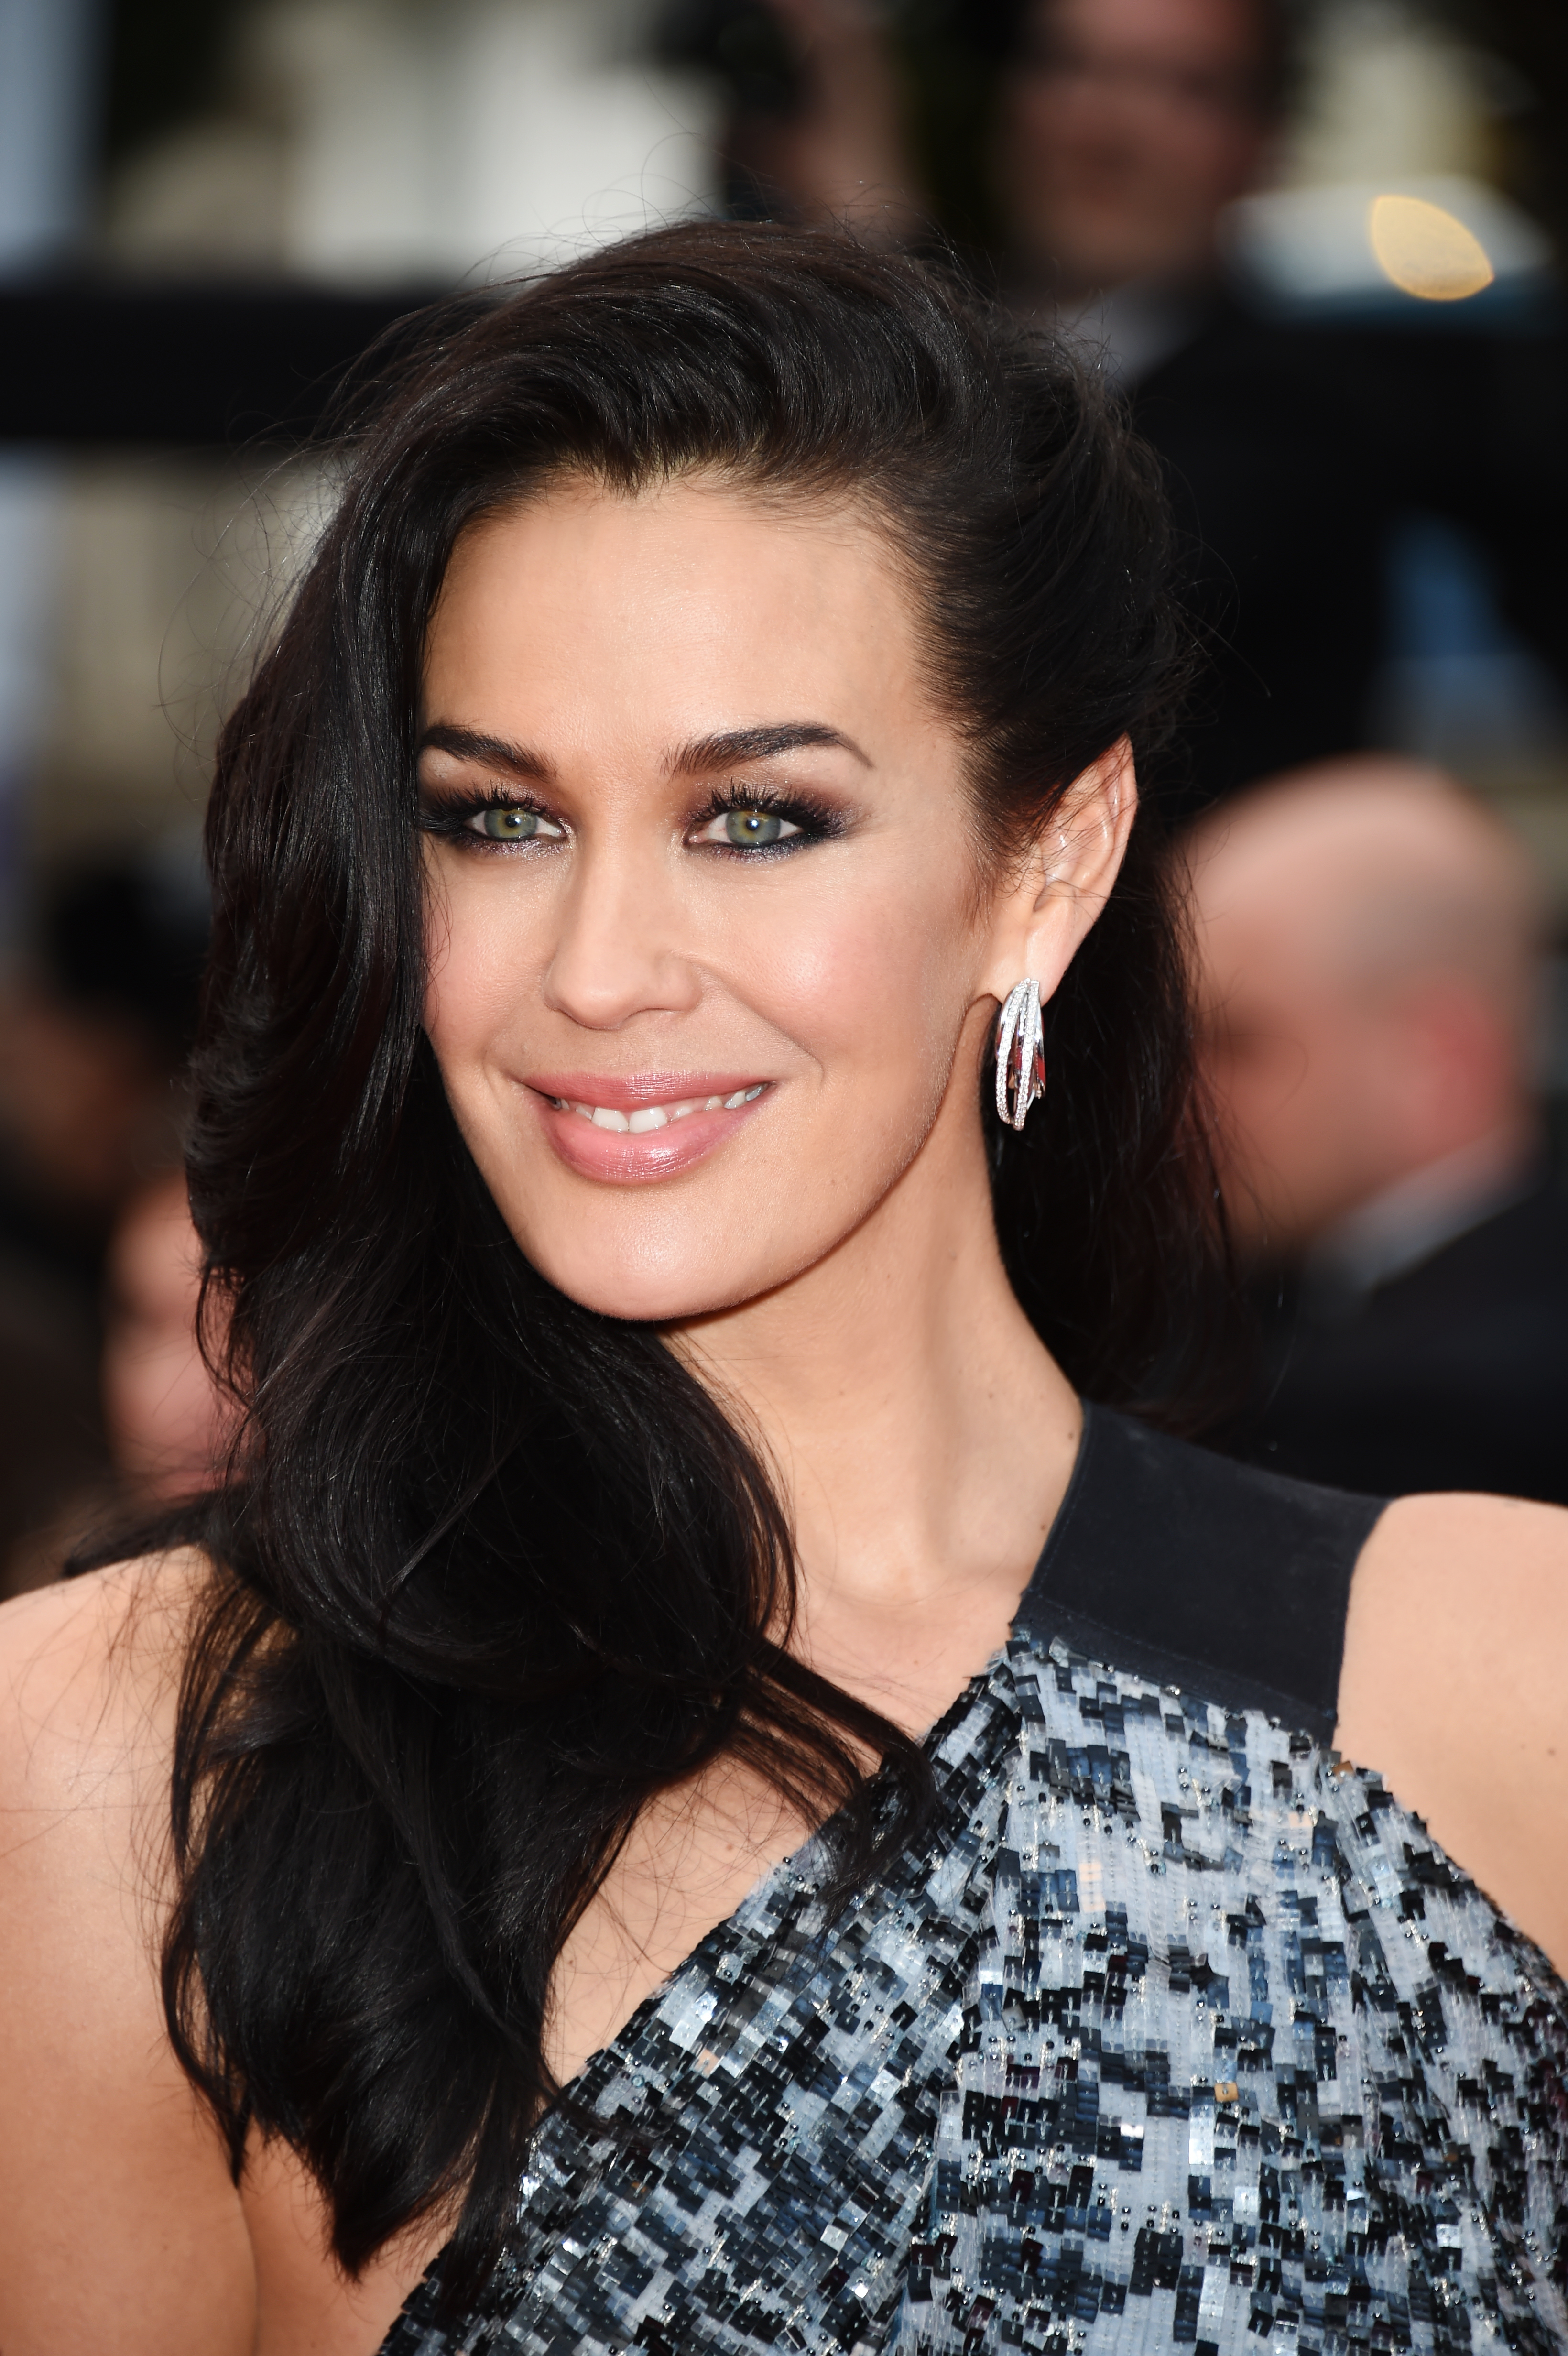 Megan Gale attends the Sicario Premiere during the 68th annual Cannes Film Festival on May 19, 2015 in Cannes, France